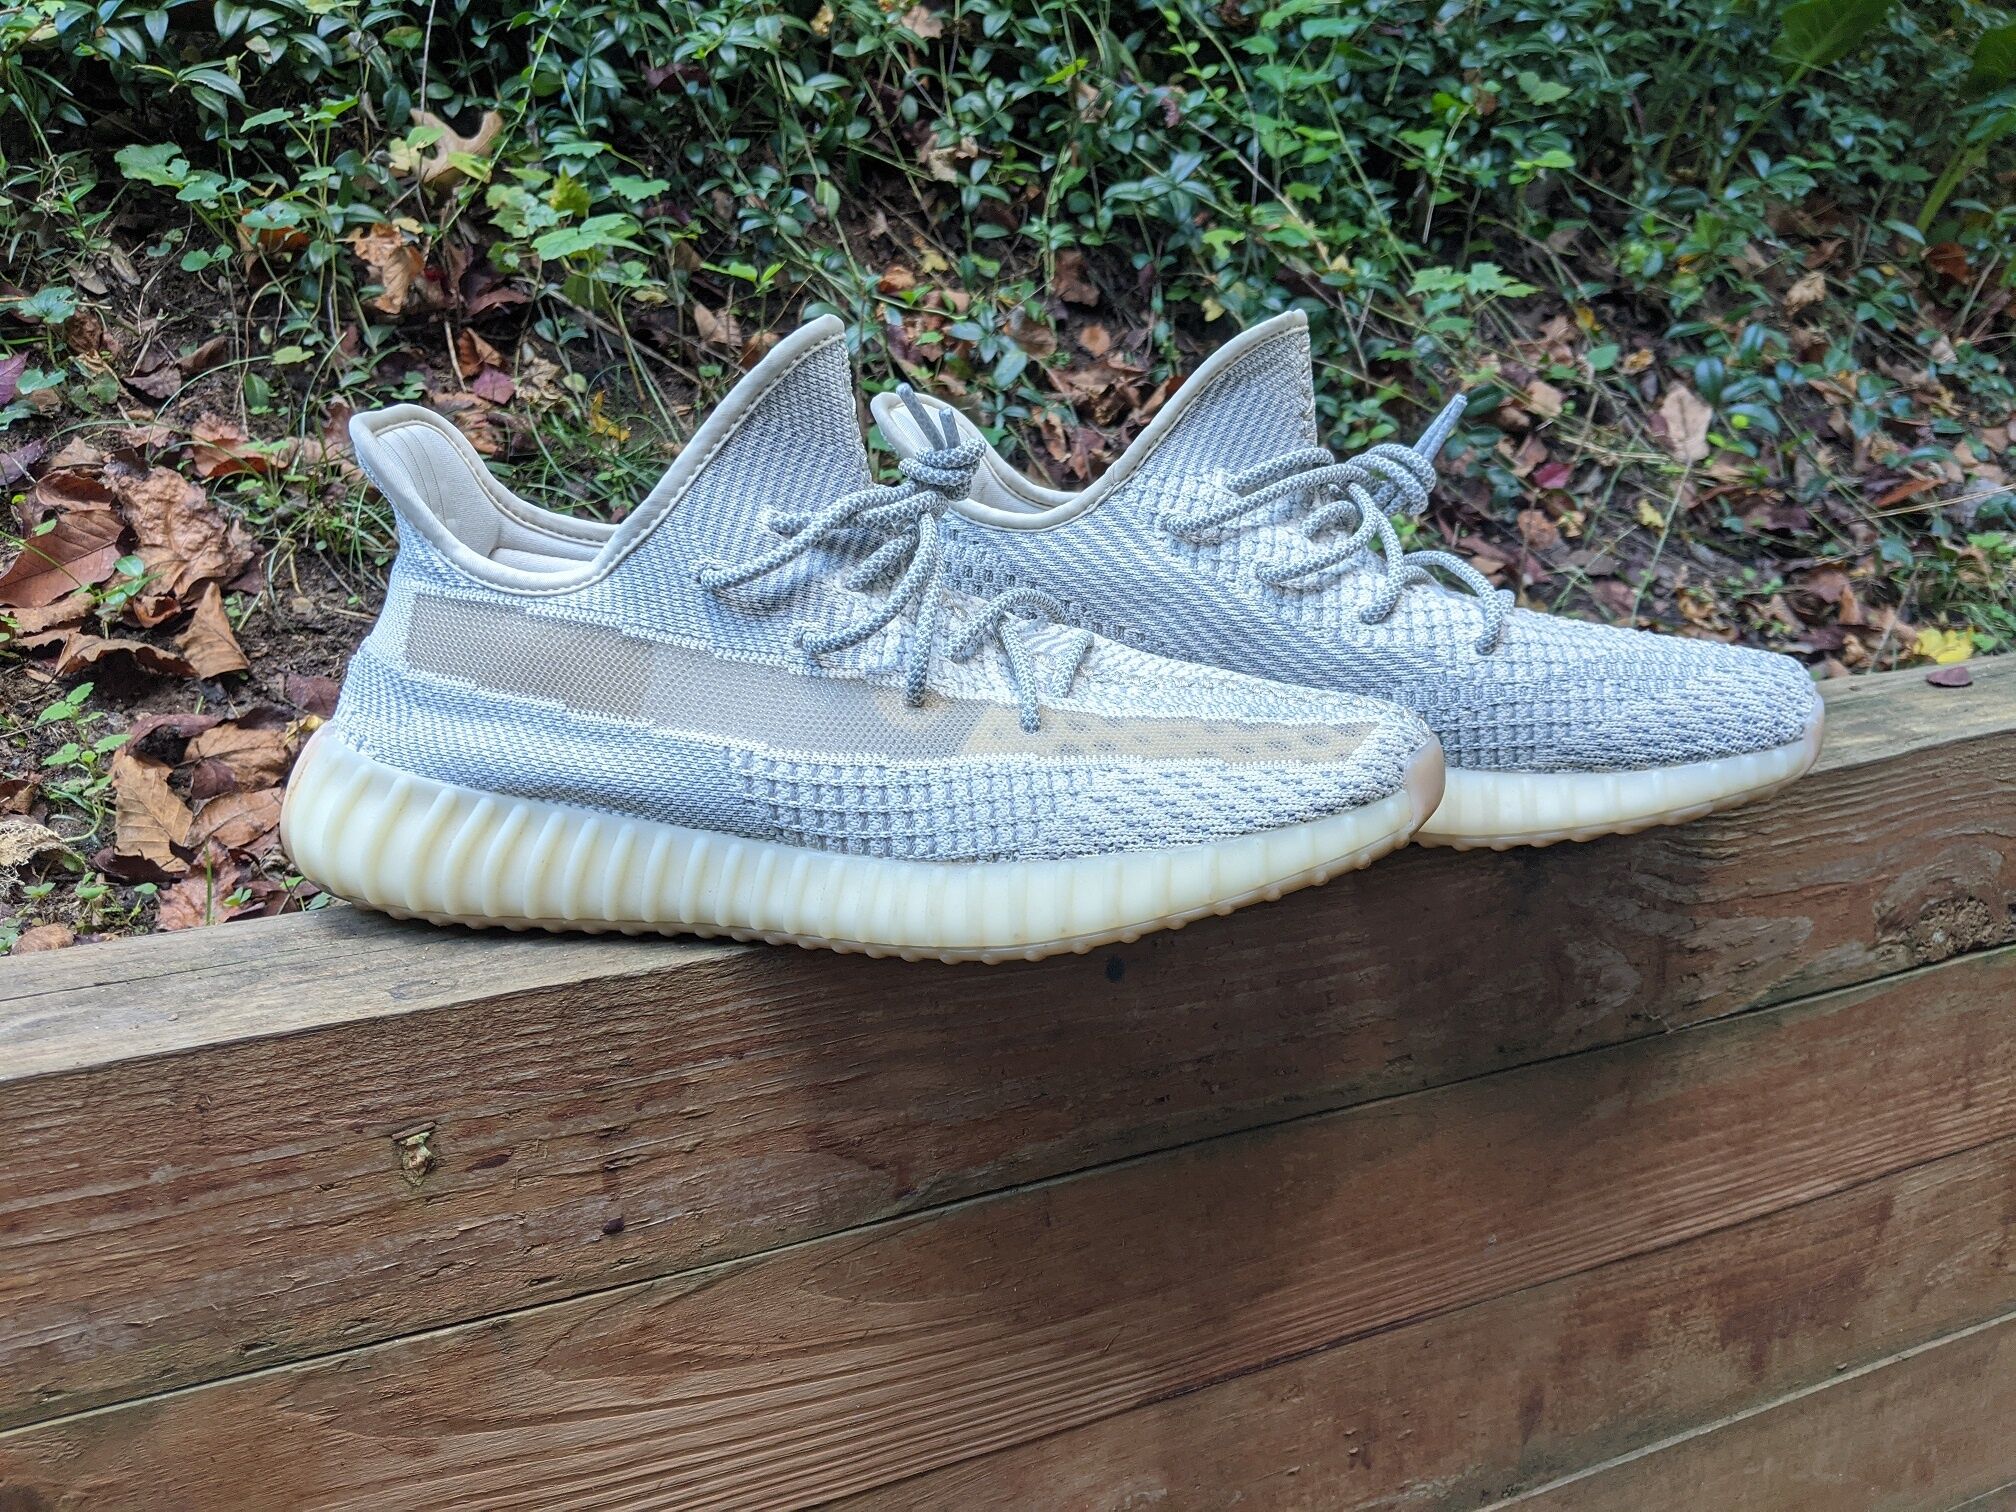 Yeezy 350 V2 Lundmark: 2 Years In. Worth the Hype? - 100wears